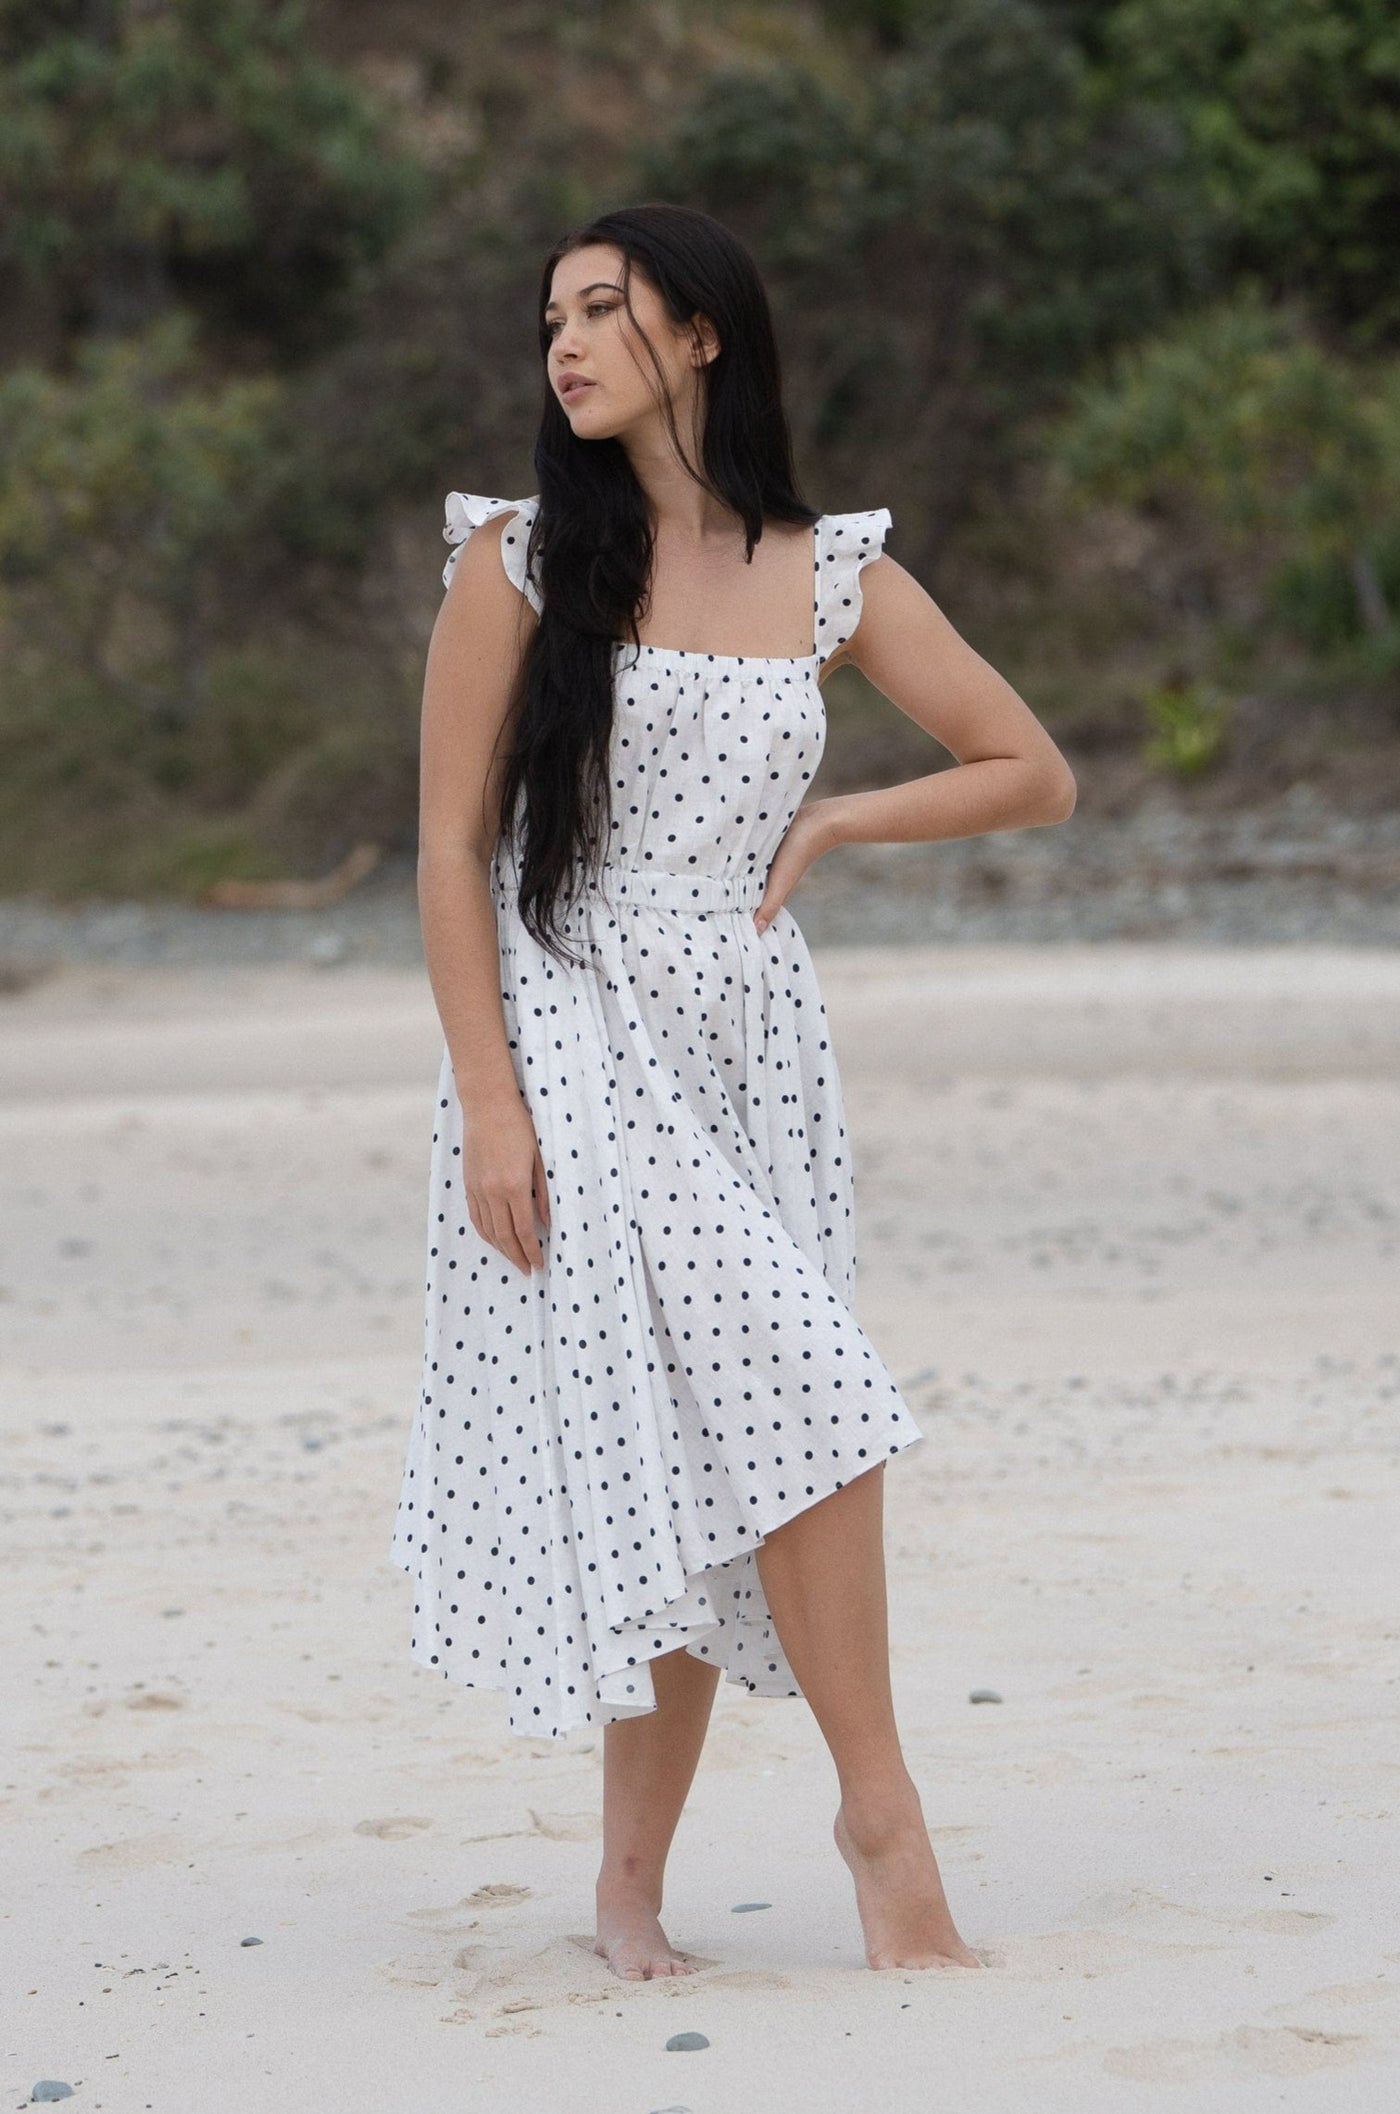 Lilly Pilly Collection 100% organic linen Mia Dress in  Polka dot